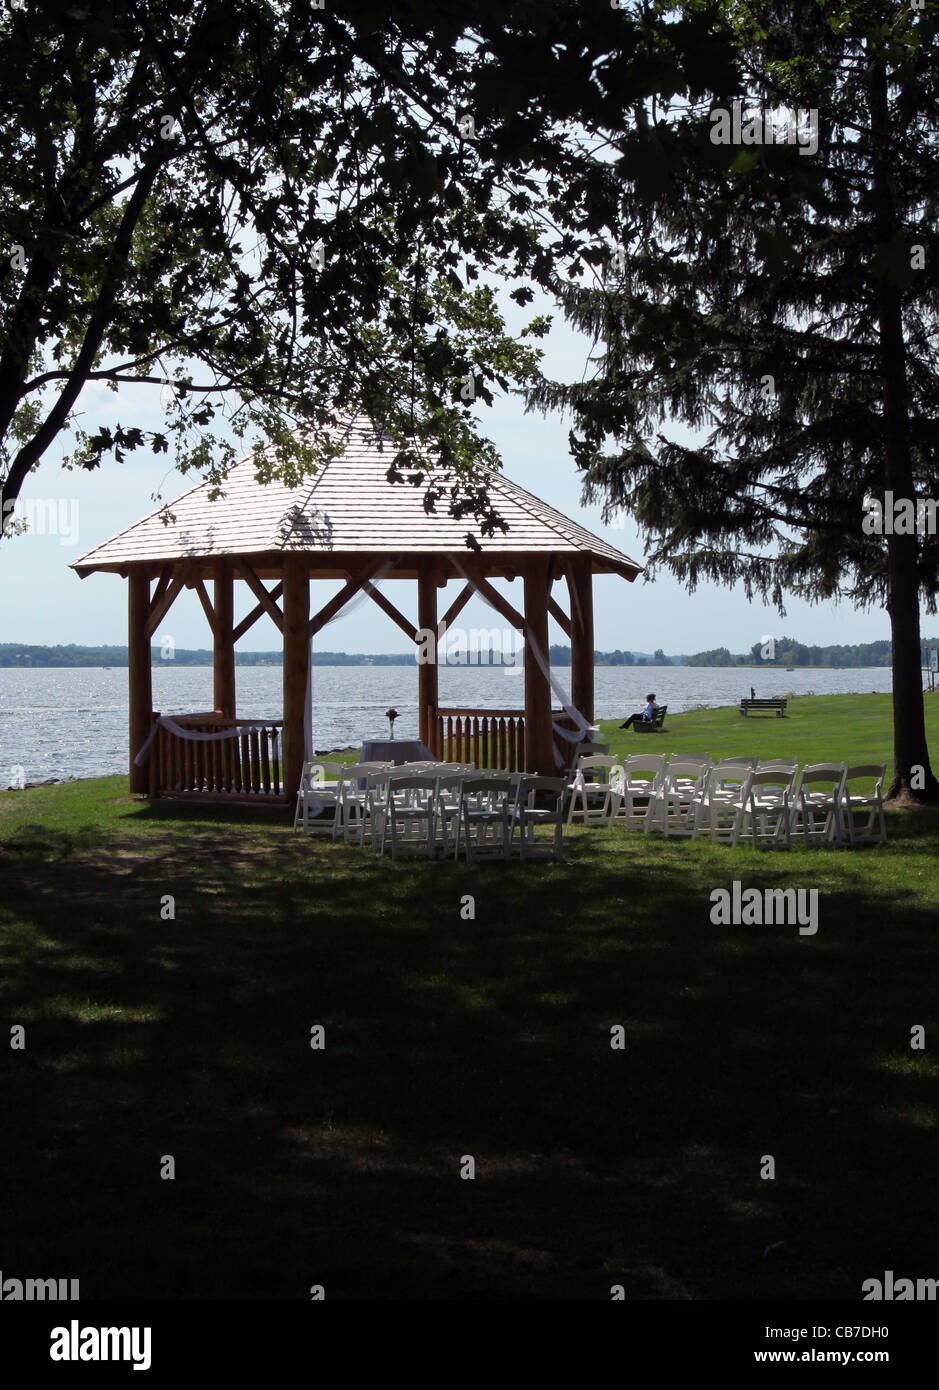 Wedding chapel by river side in Canada Stock Photo